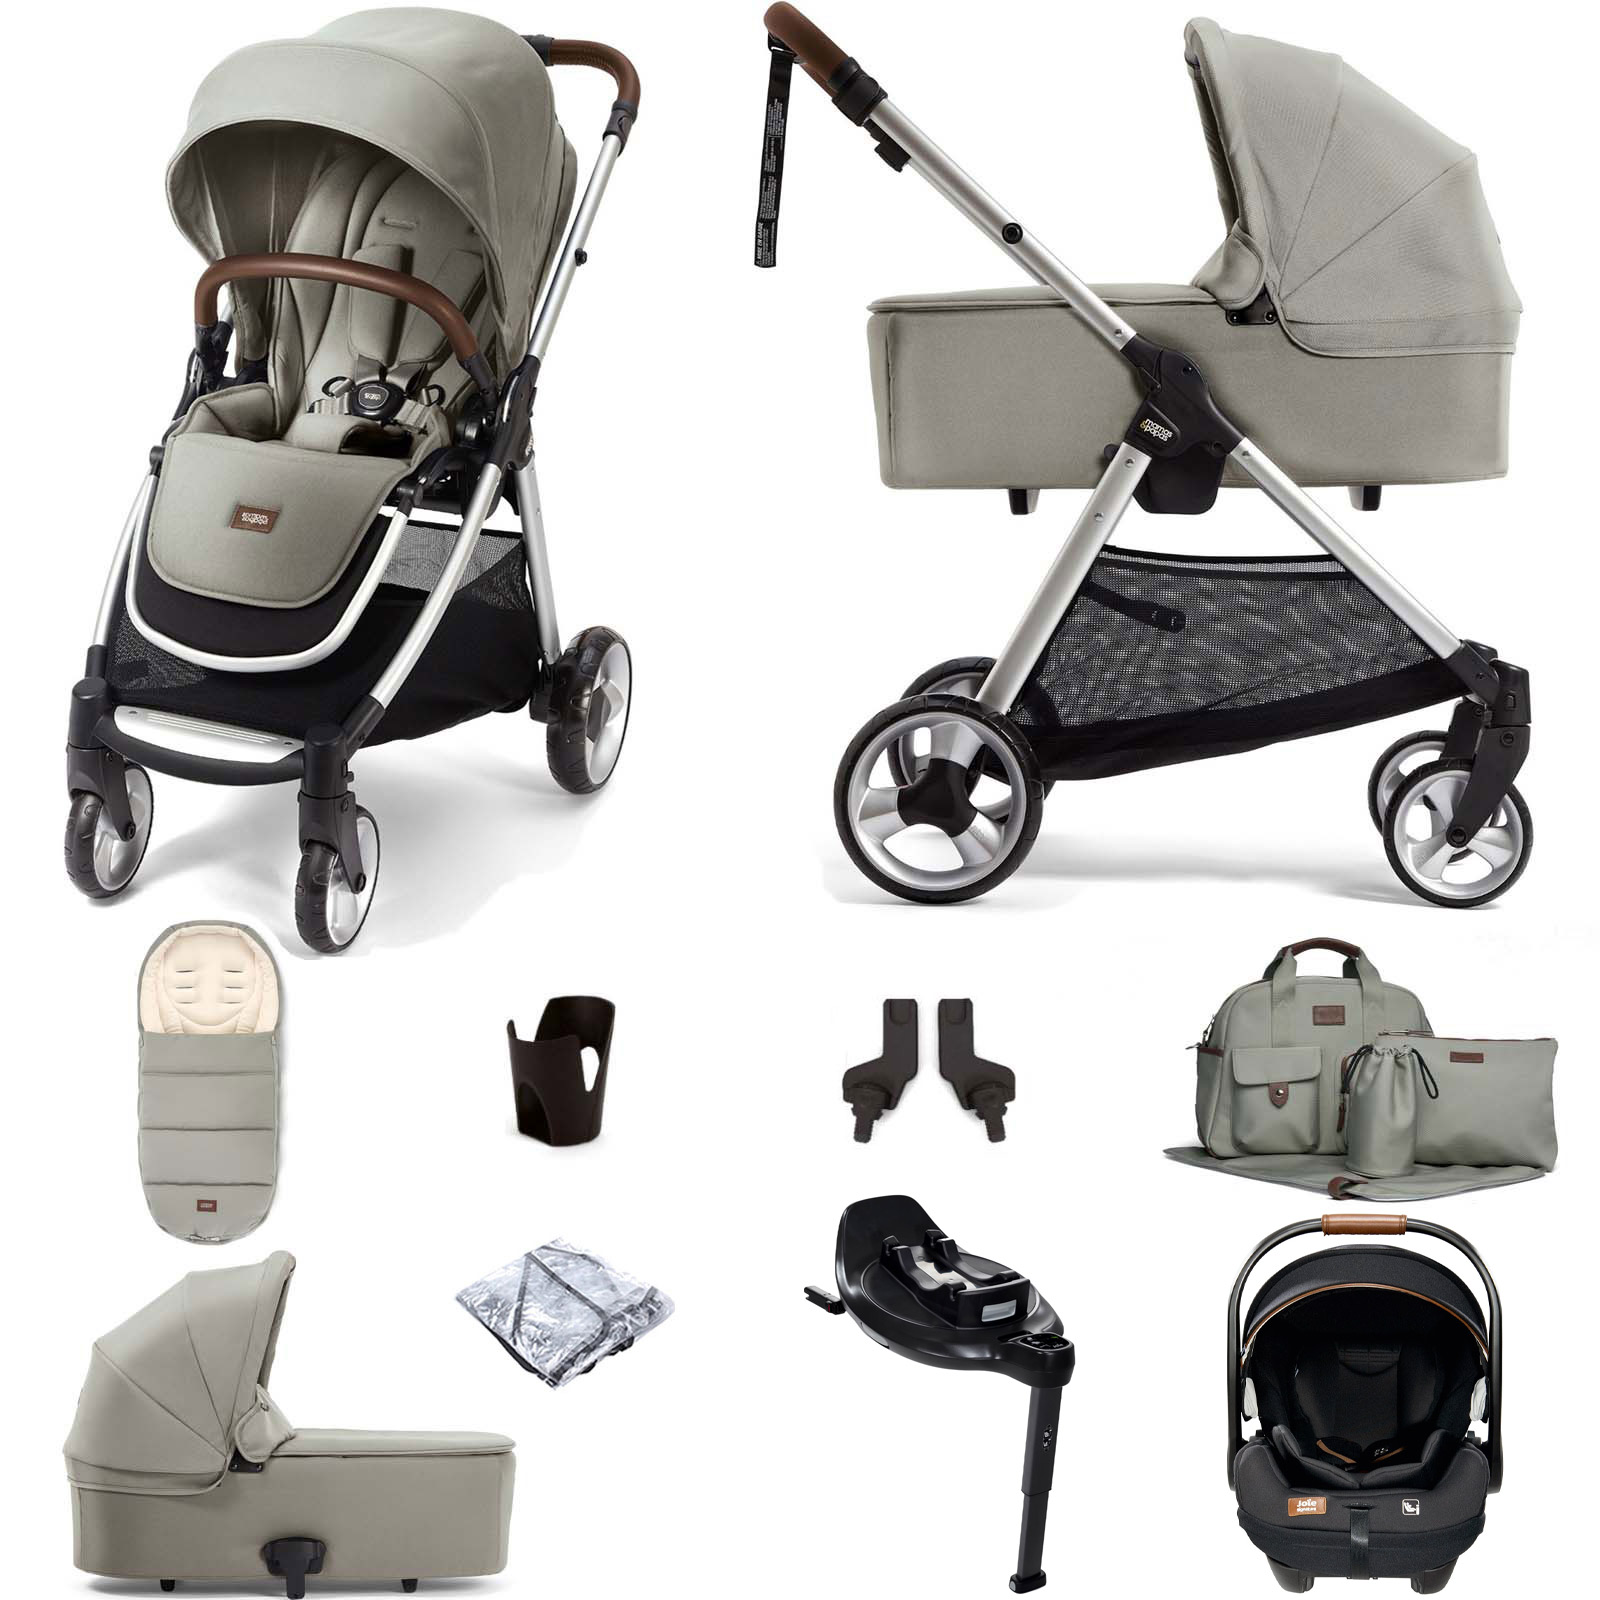 Mamas & Papas Flip XT2 Travel System with Carrycot, Accessories, i-Level Recline Car Seat & i-Base Encore - Sage Green